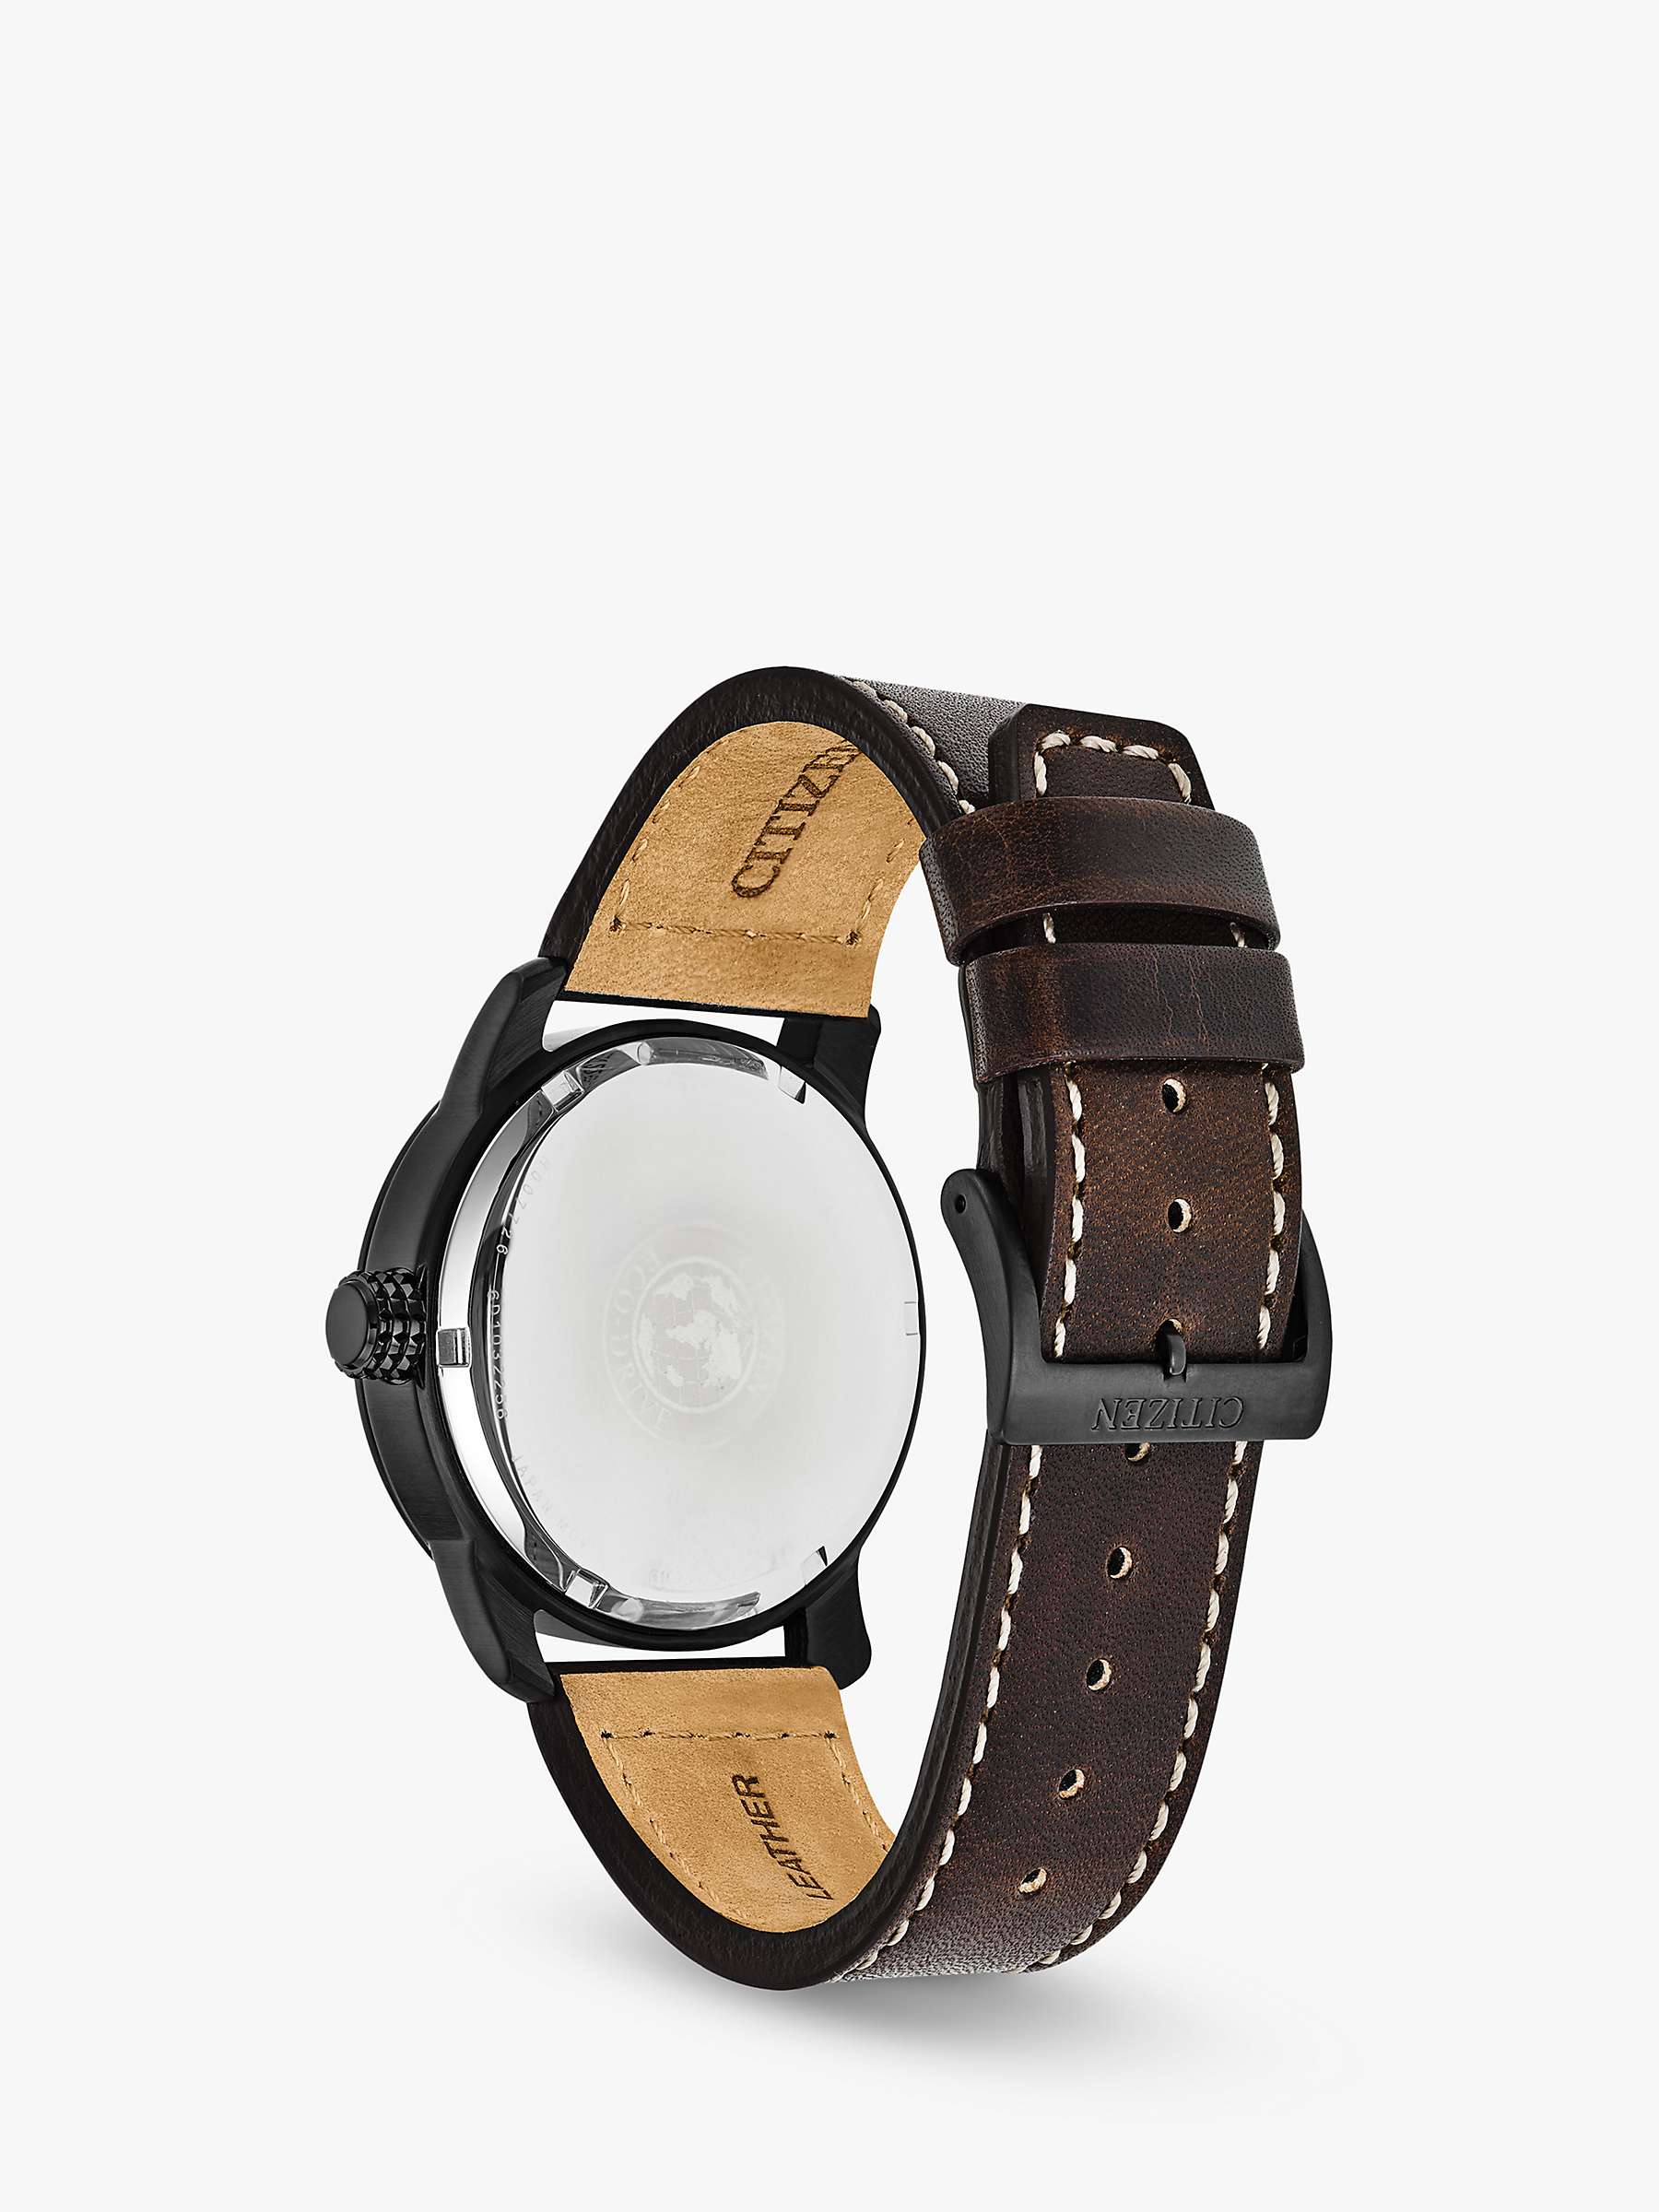 Buy Citizen BM8478-01L Men's Day Date Leather Strap Watch, Brown/Blue Online at johnlewis.com